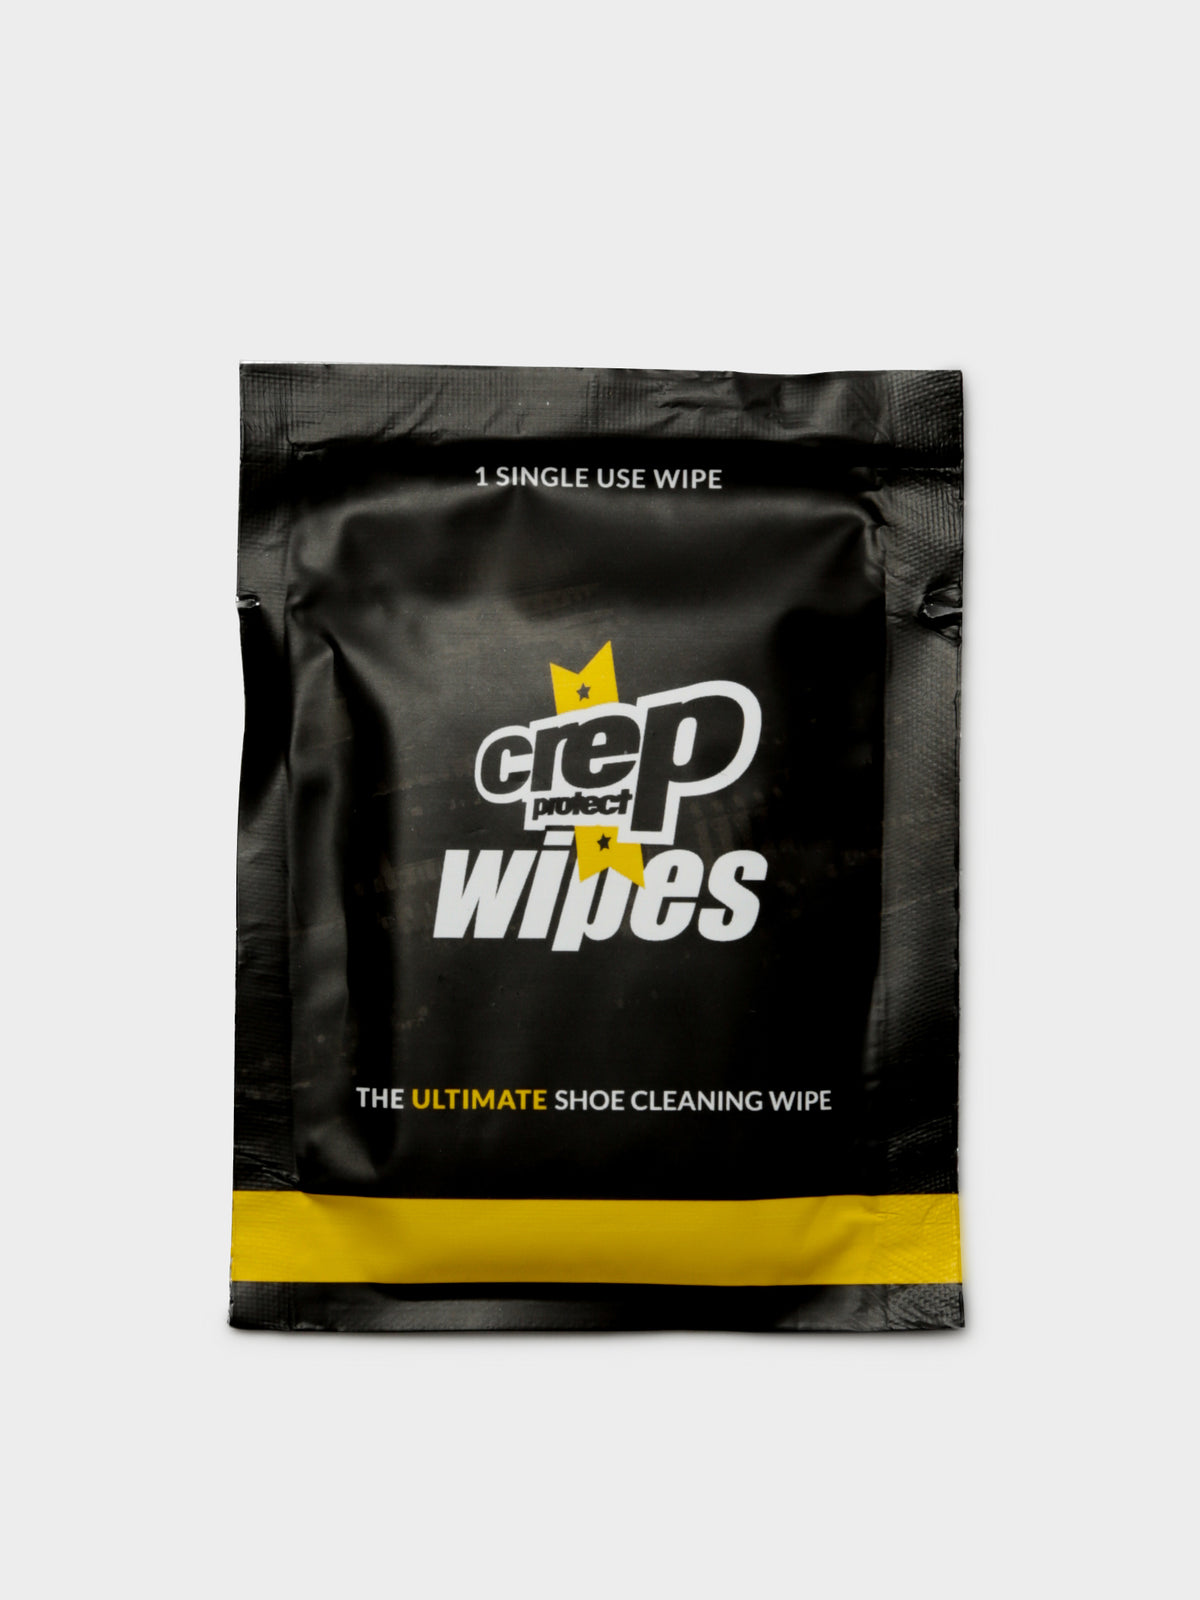 The Ultimate Shoe Cleaning Wipes